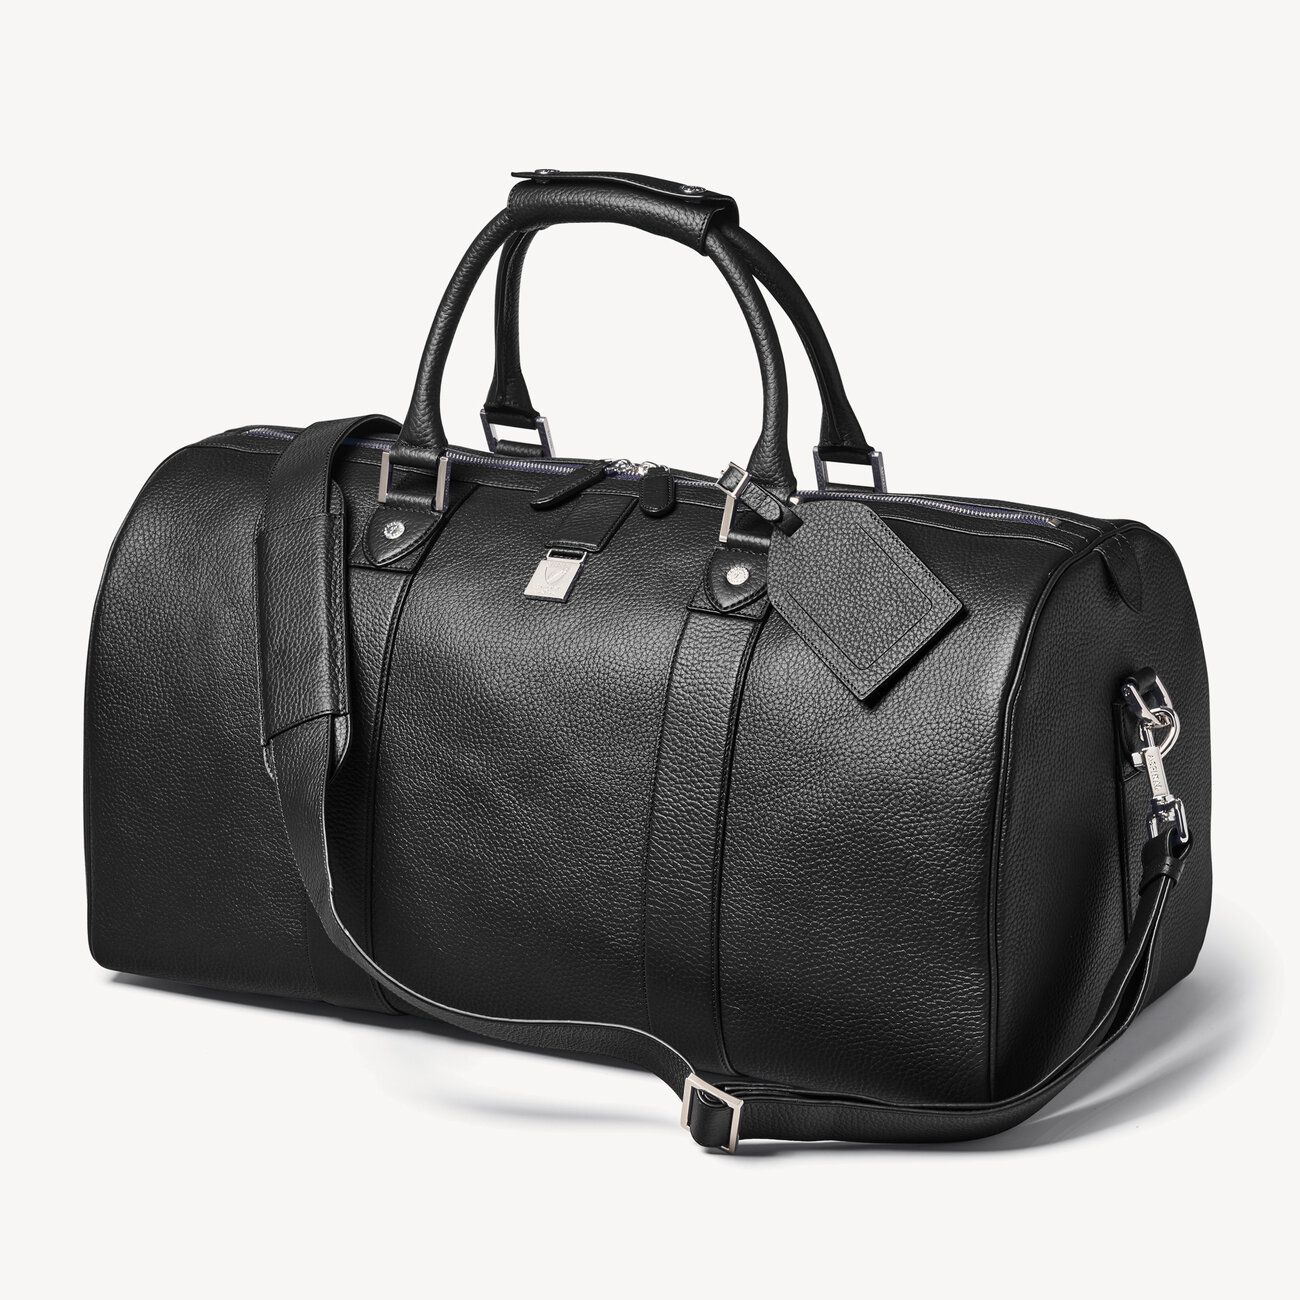 I Bought the Duffel Bag That's in 'The Expanse'—and Love It | WIRED